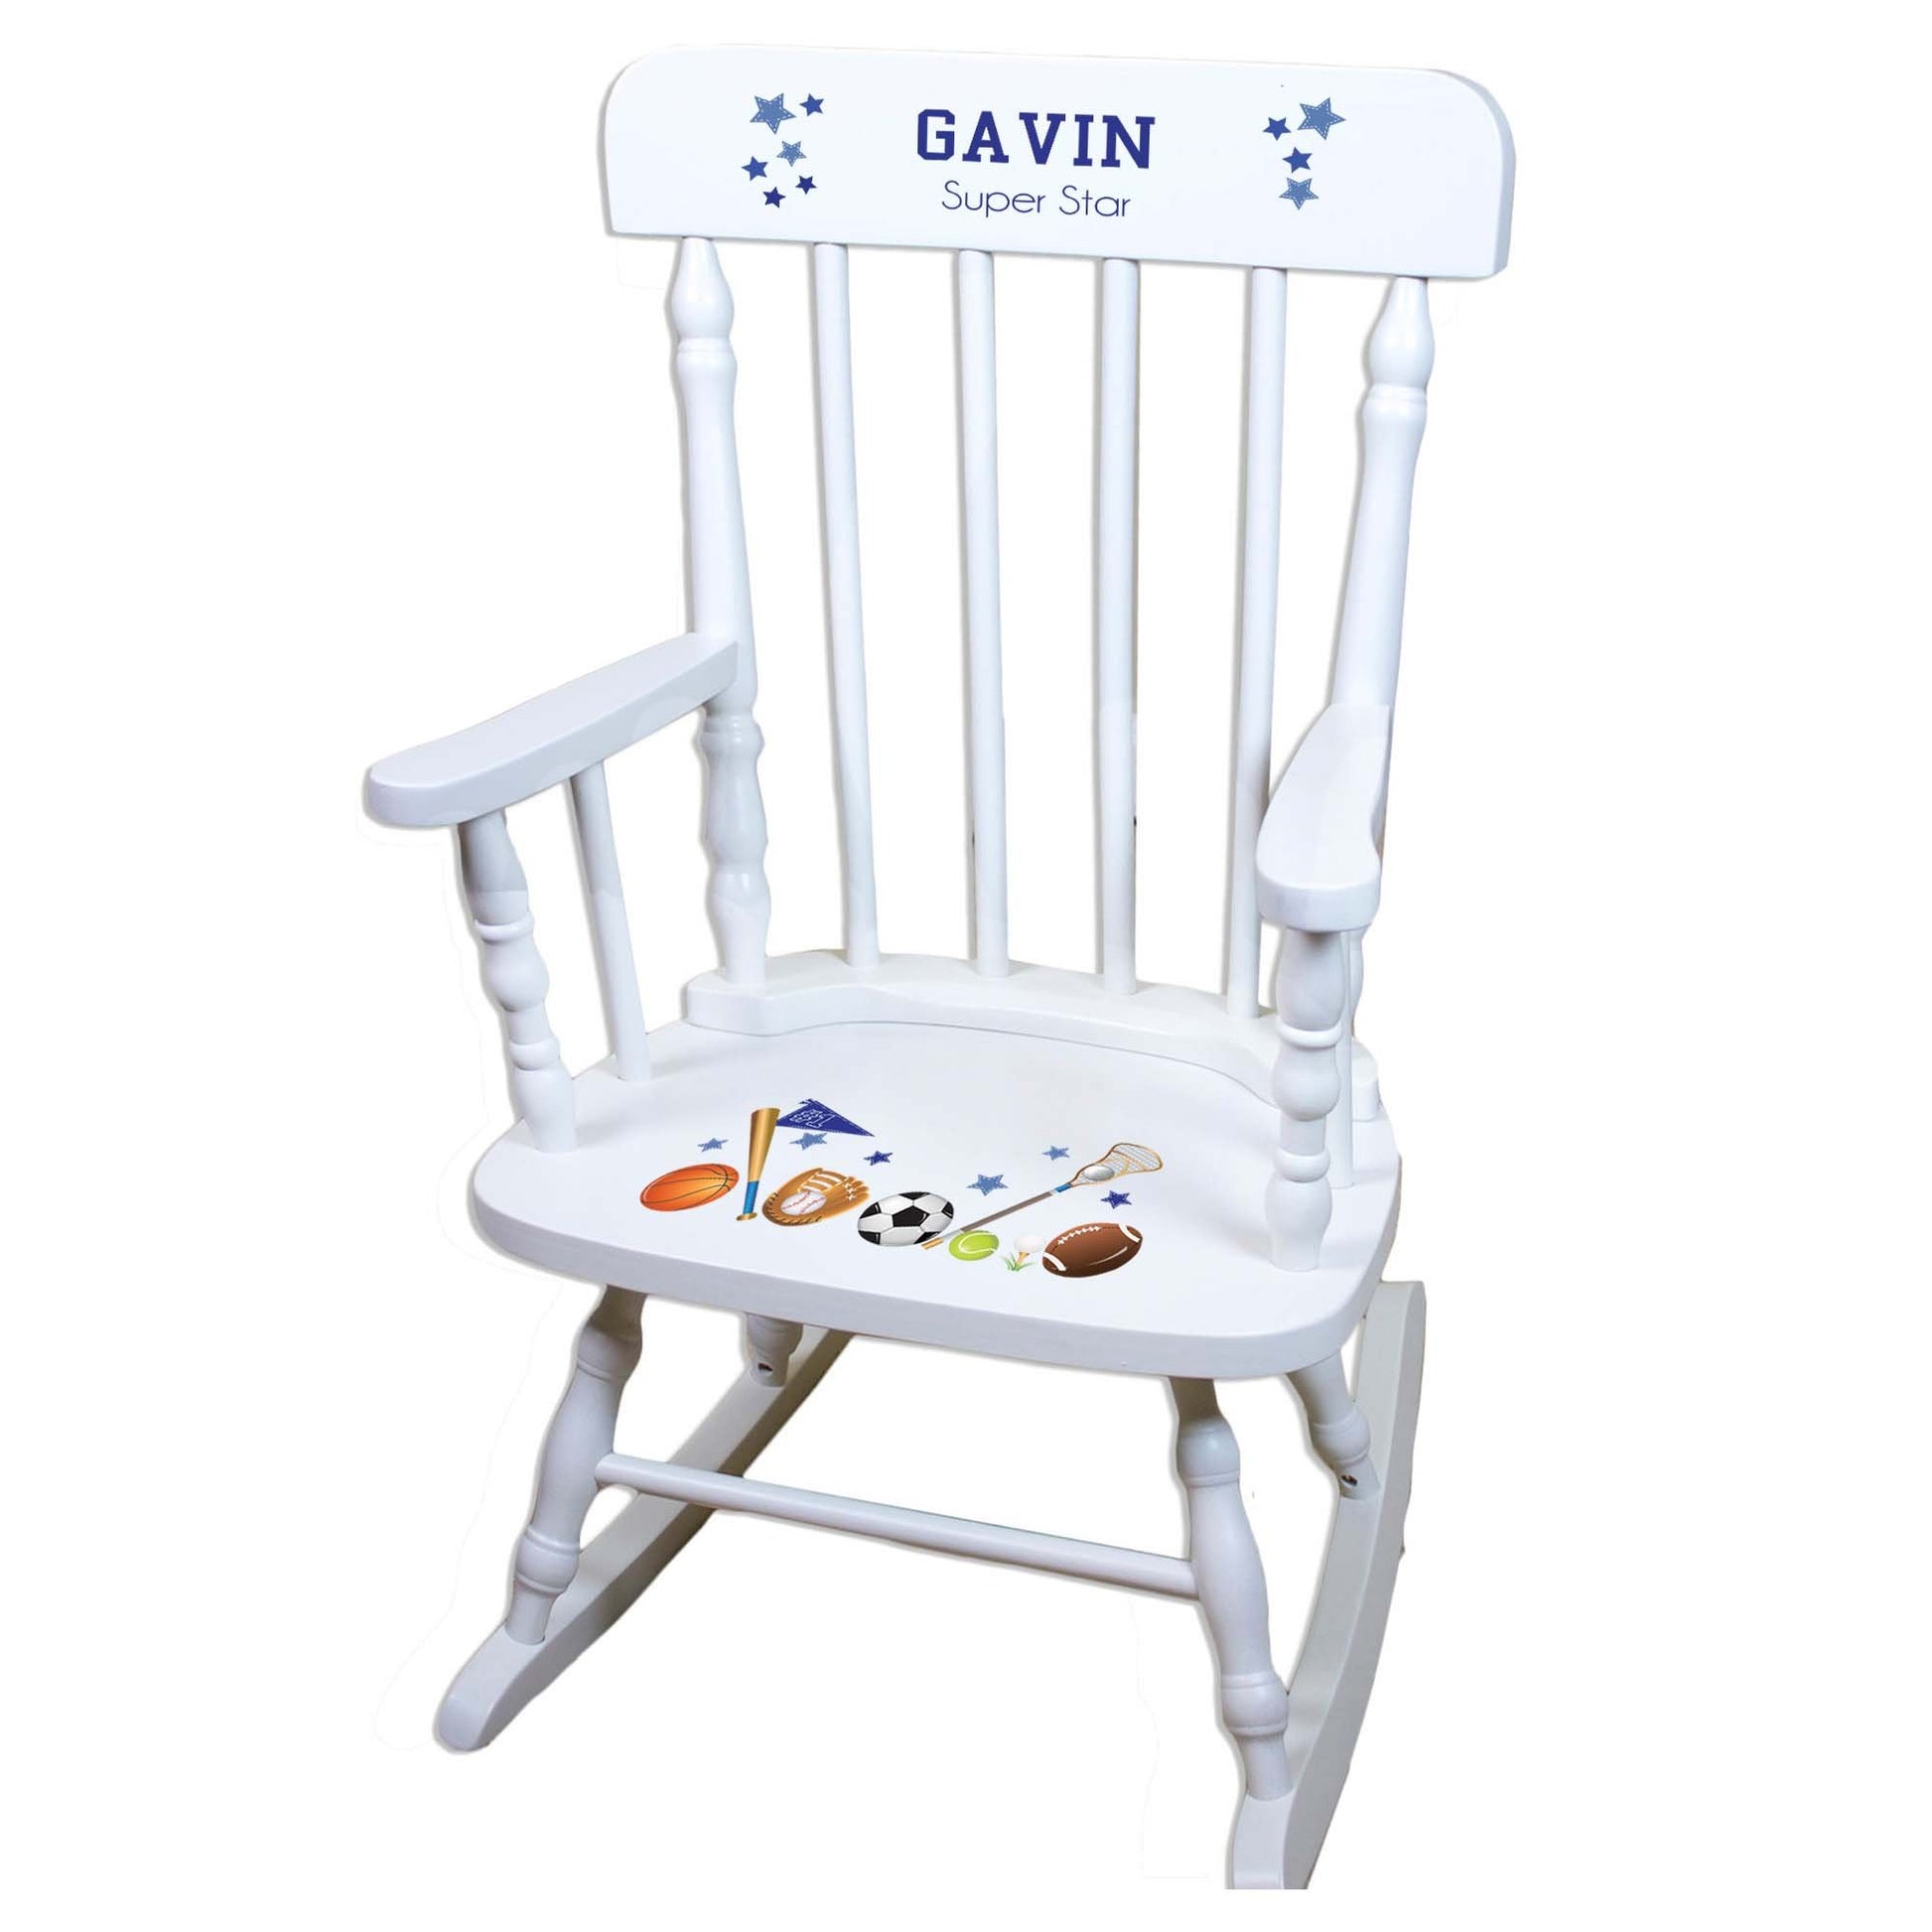 Airplane White Personalized Wooden ,rocking chairs